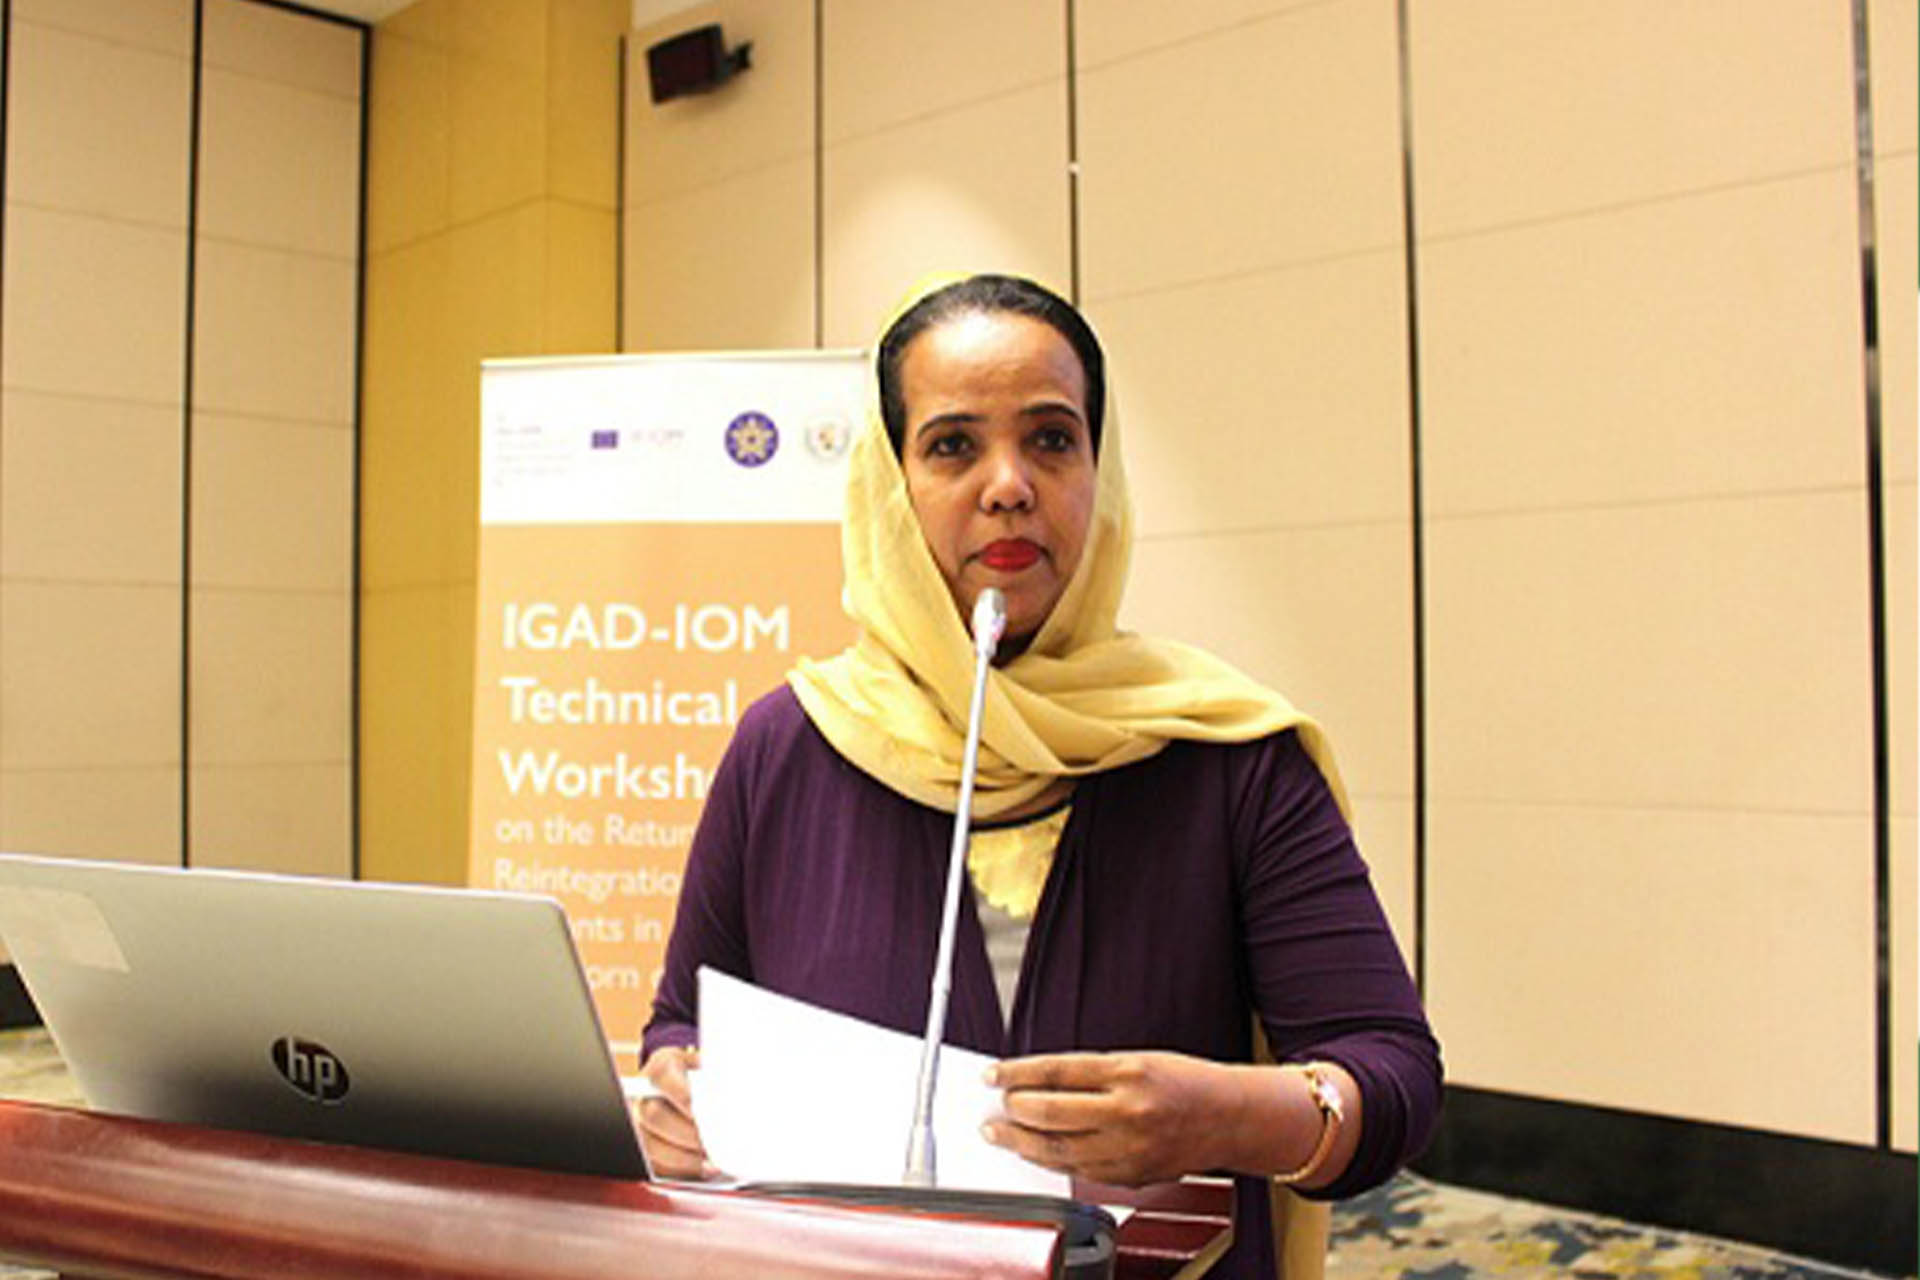 IGAD and IOM Convene In Search For Solutions for Return and Reintegration of Migrants